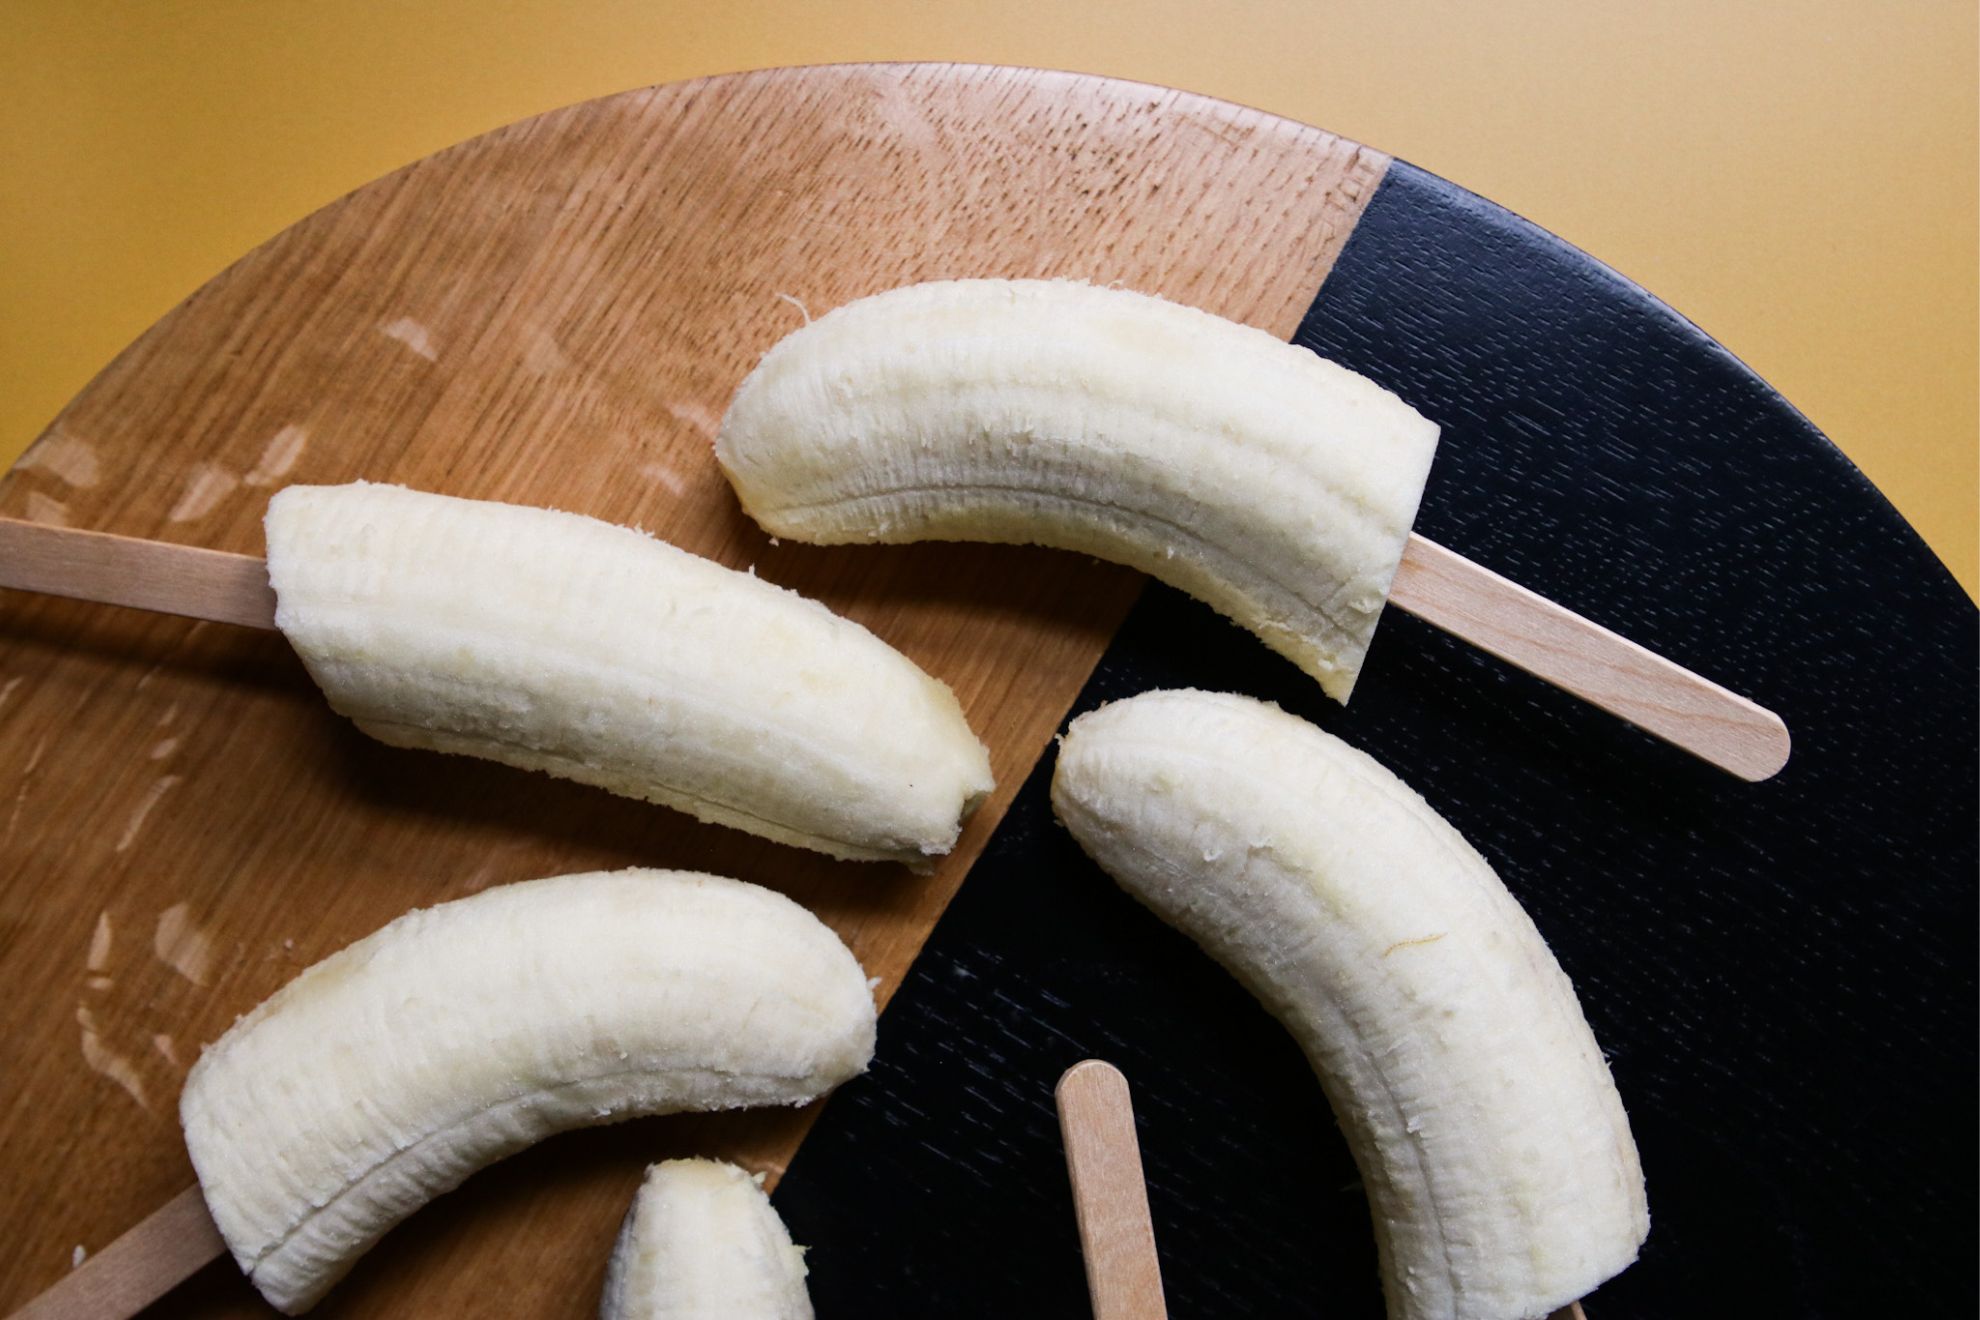 This is an overhead horizontal image of a black and wood circle cutting board on a yellow surface. On the board are banana halves with popsicle sticks shoved in the bottoms.